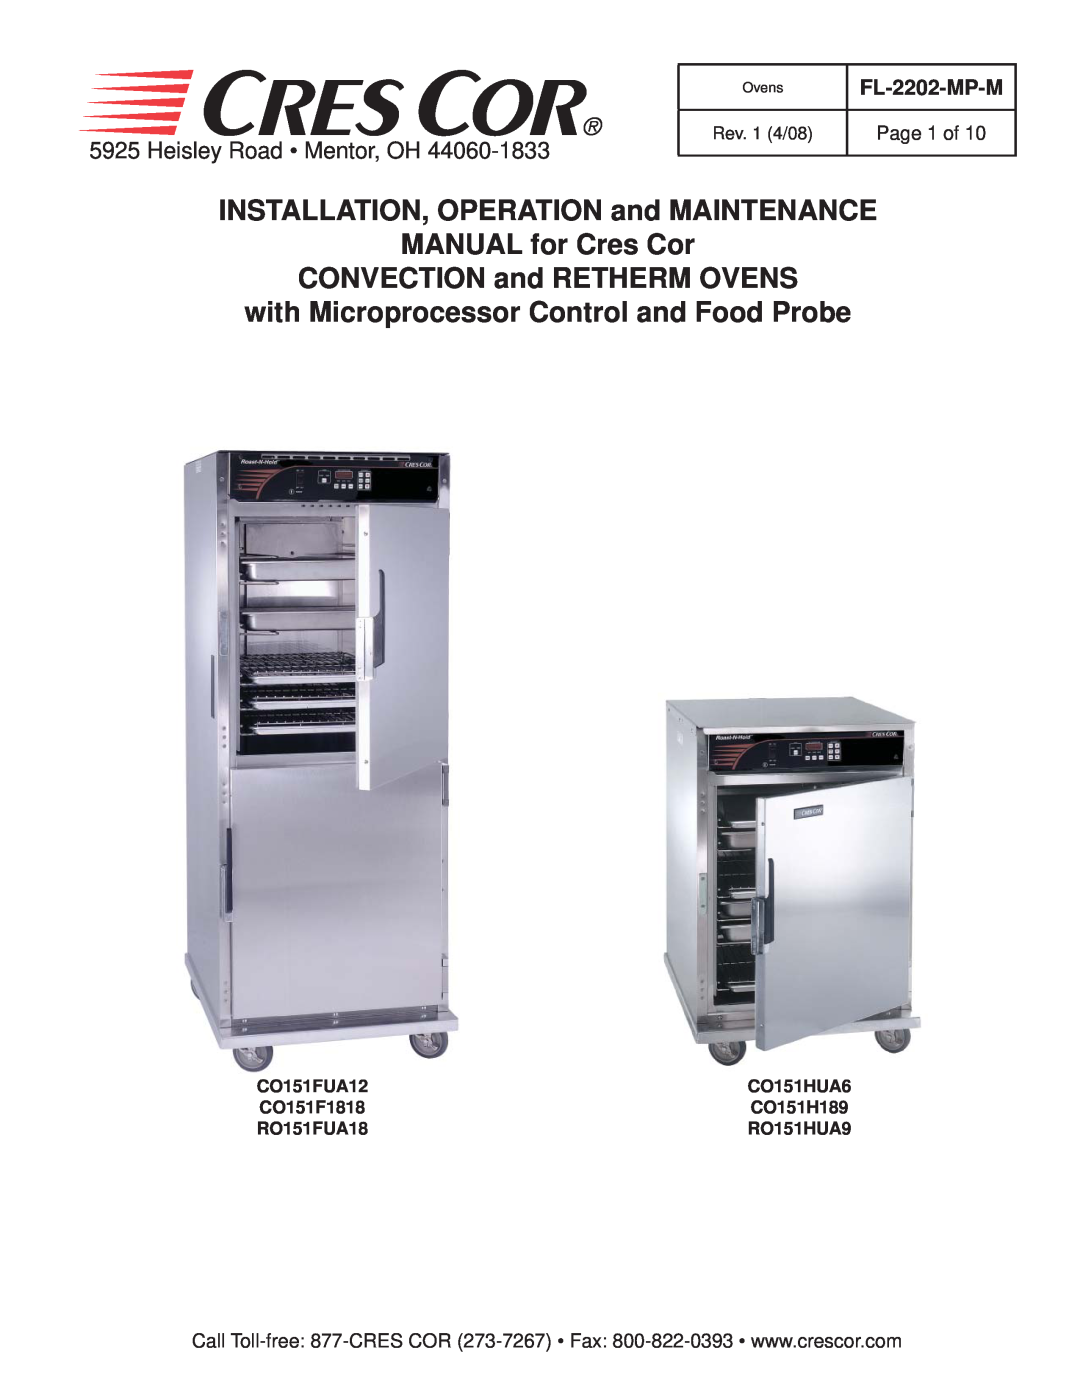 Cres Cor CO151HUA6 manual INSTALLATION, OPERATION and MAINTENANCE MANUAL for Cres Cor, CONVECTION and RETHERM OVENS 